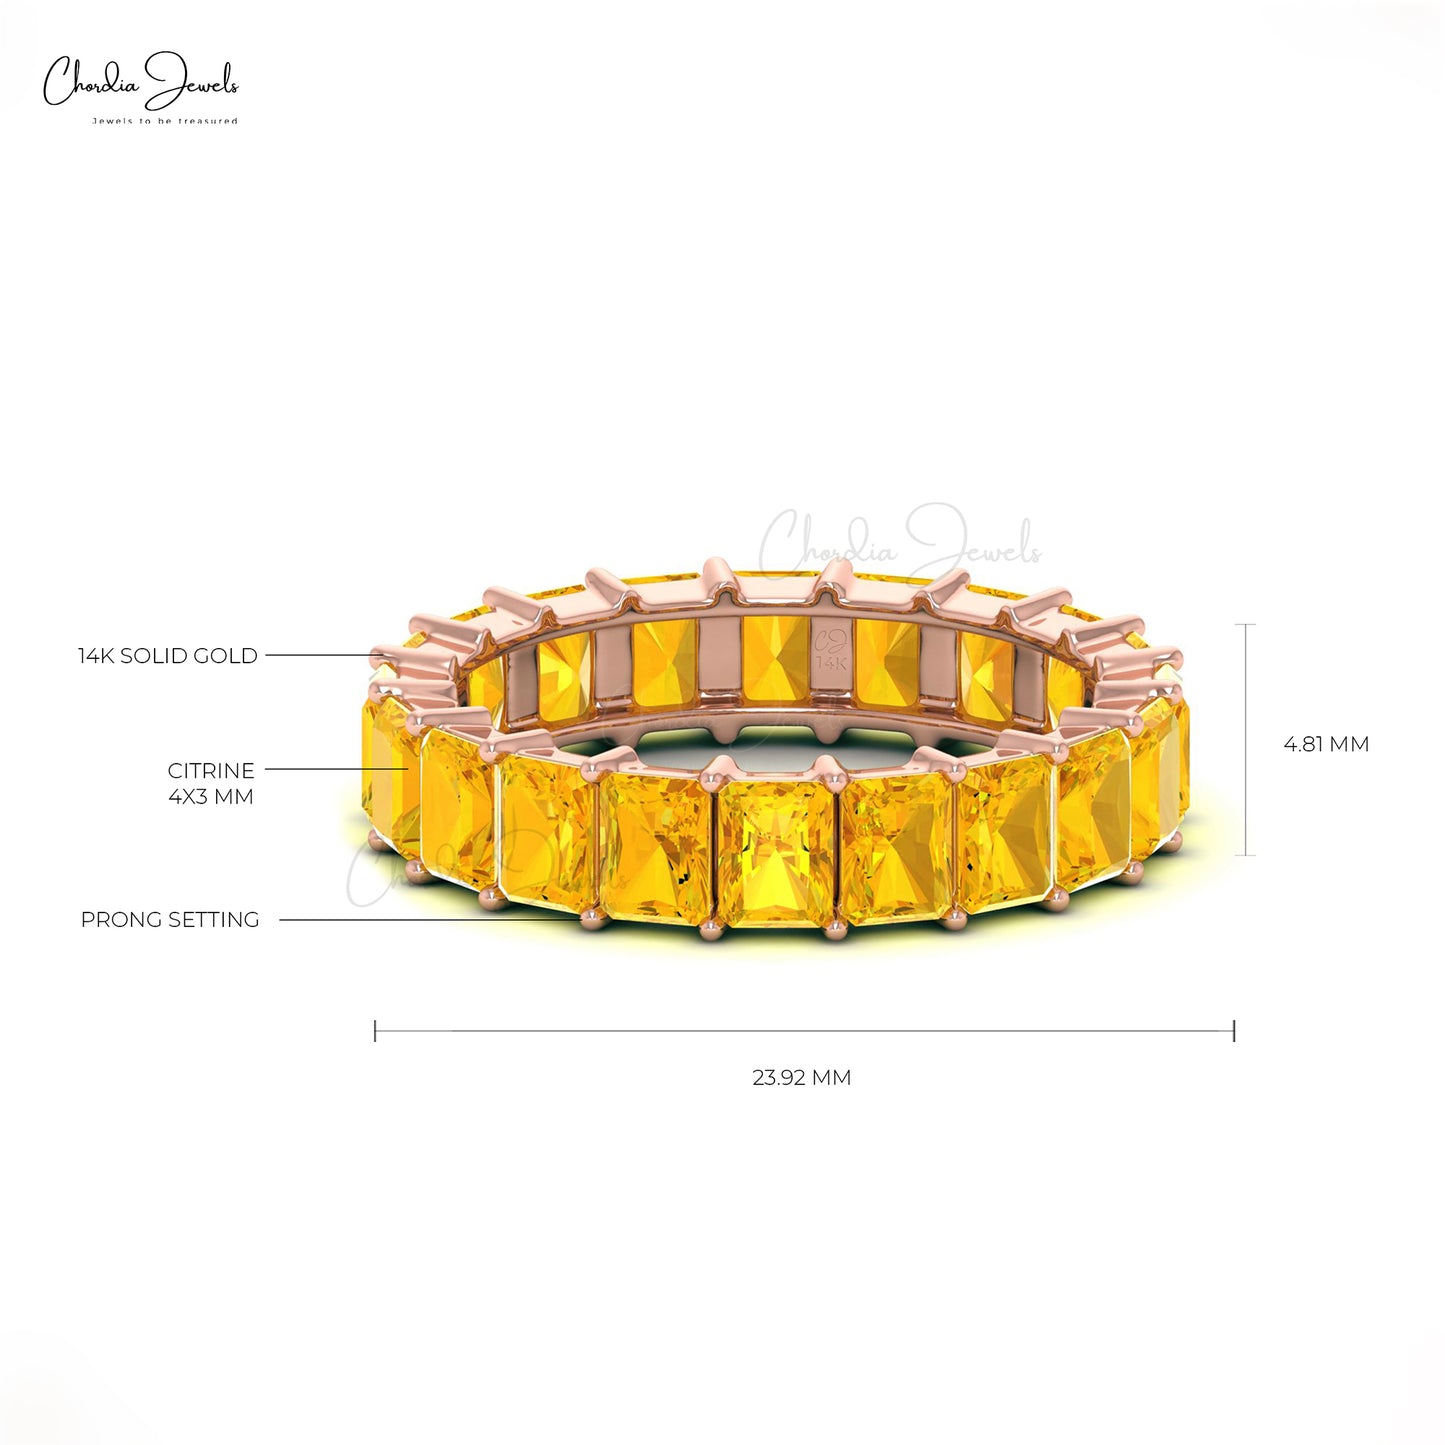 November Birtstone 4x3 mm Emerald Cut Natural Citrine Full Eternity Band Ring in 14k Solid Gold